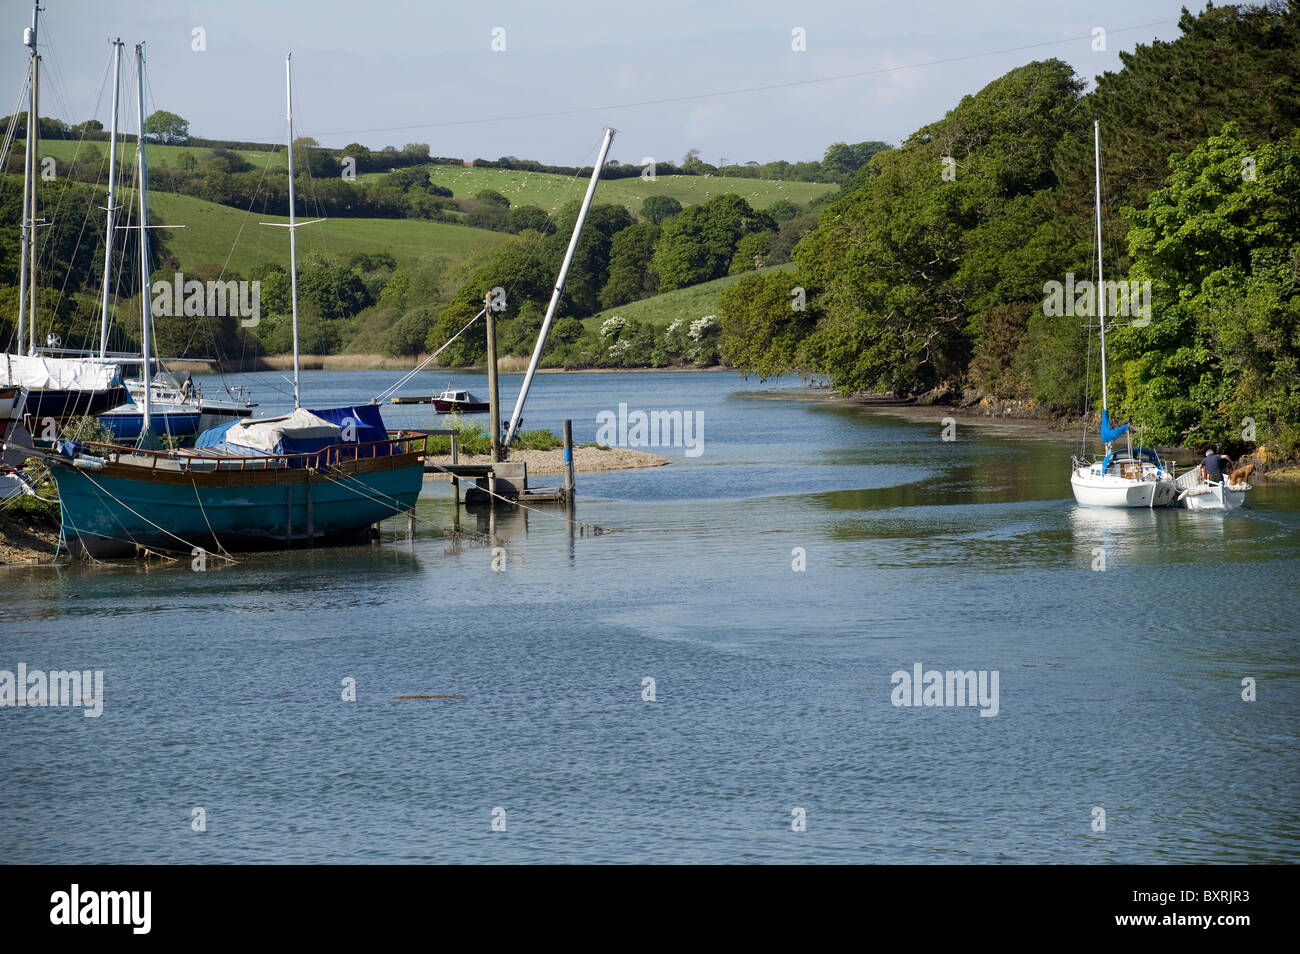 Great Britain, England, Cornwall, Roseland Peninsula, boats moored on the banks of one of the creeks of the River Fal Stock Photo